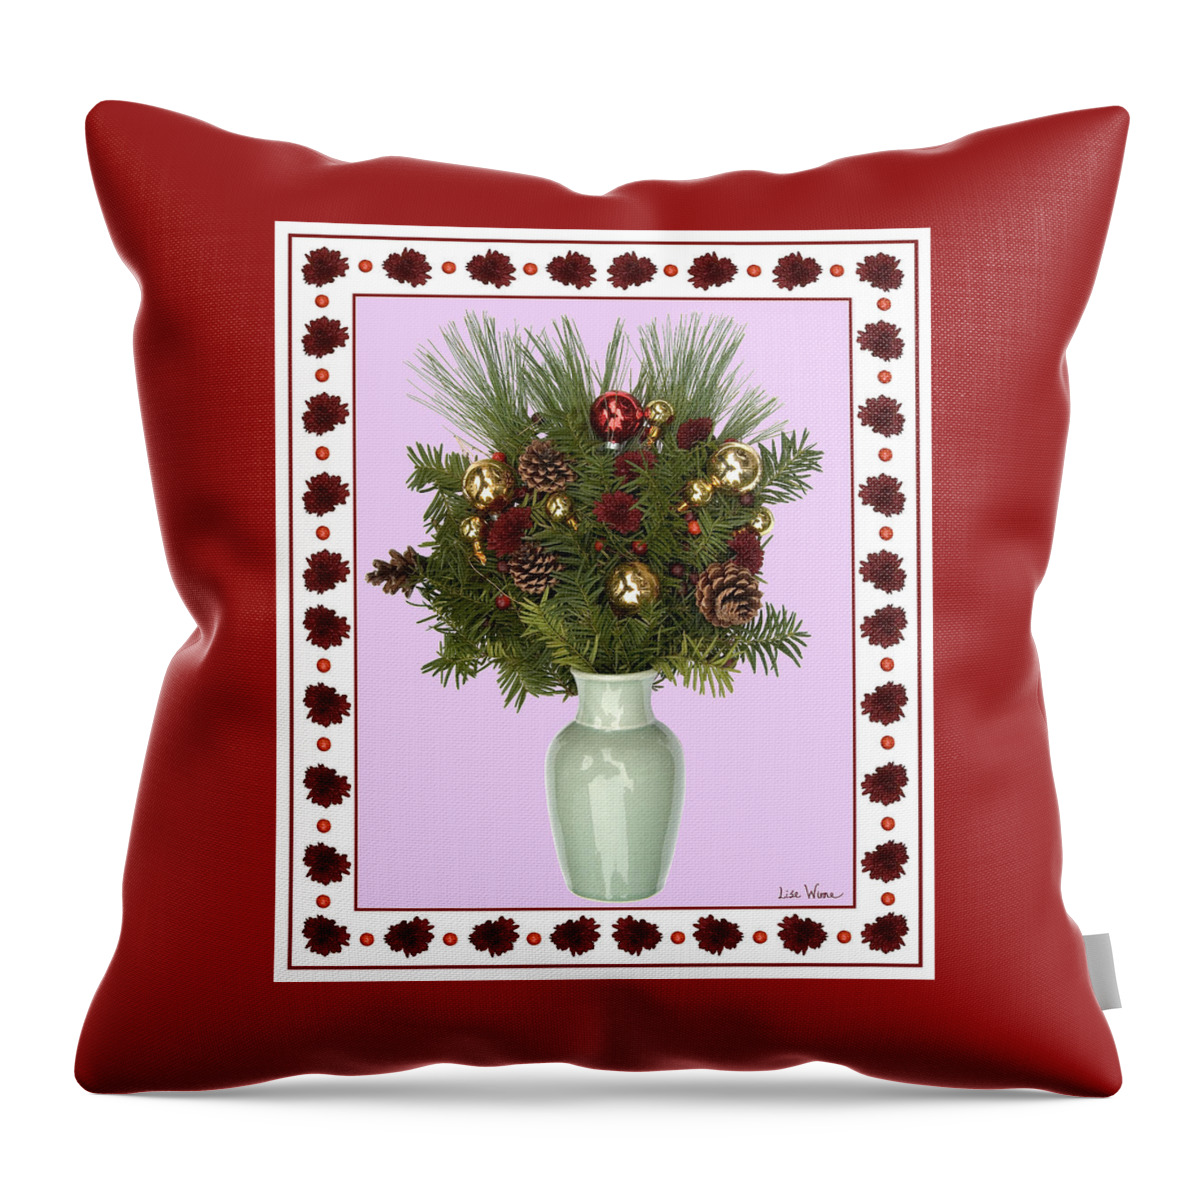 Lise Winne Throw Pillow featuring the digital art Celadon Vase with Christmas Bouquet by Lise Winne